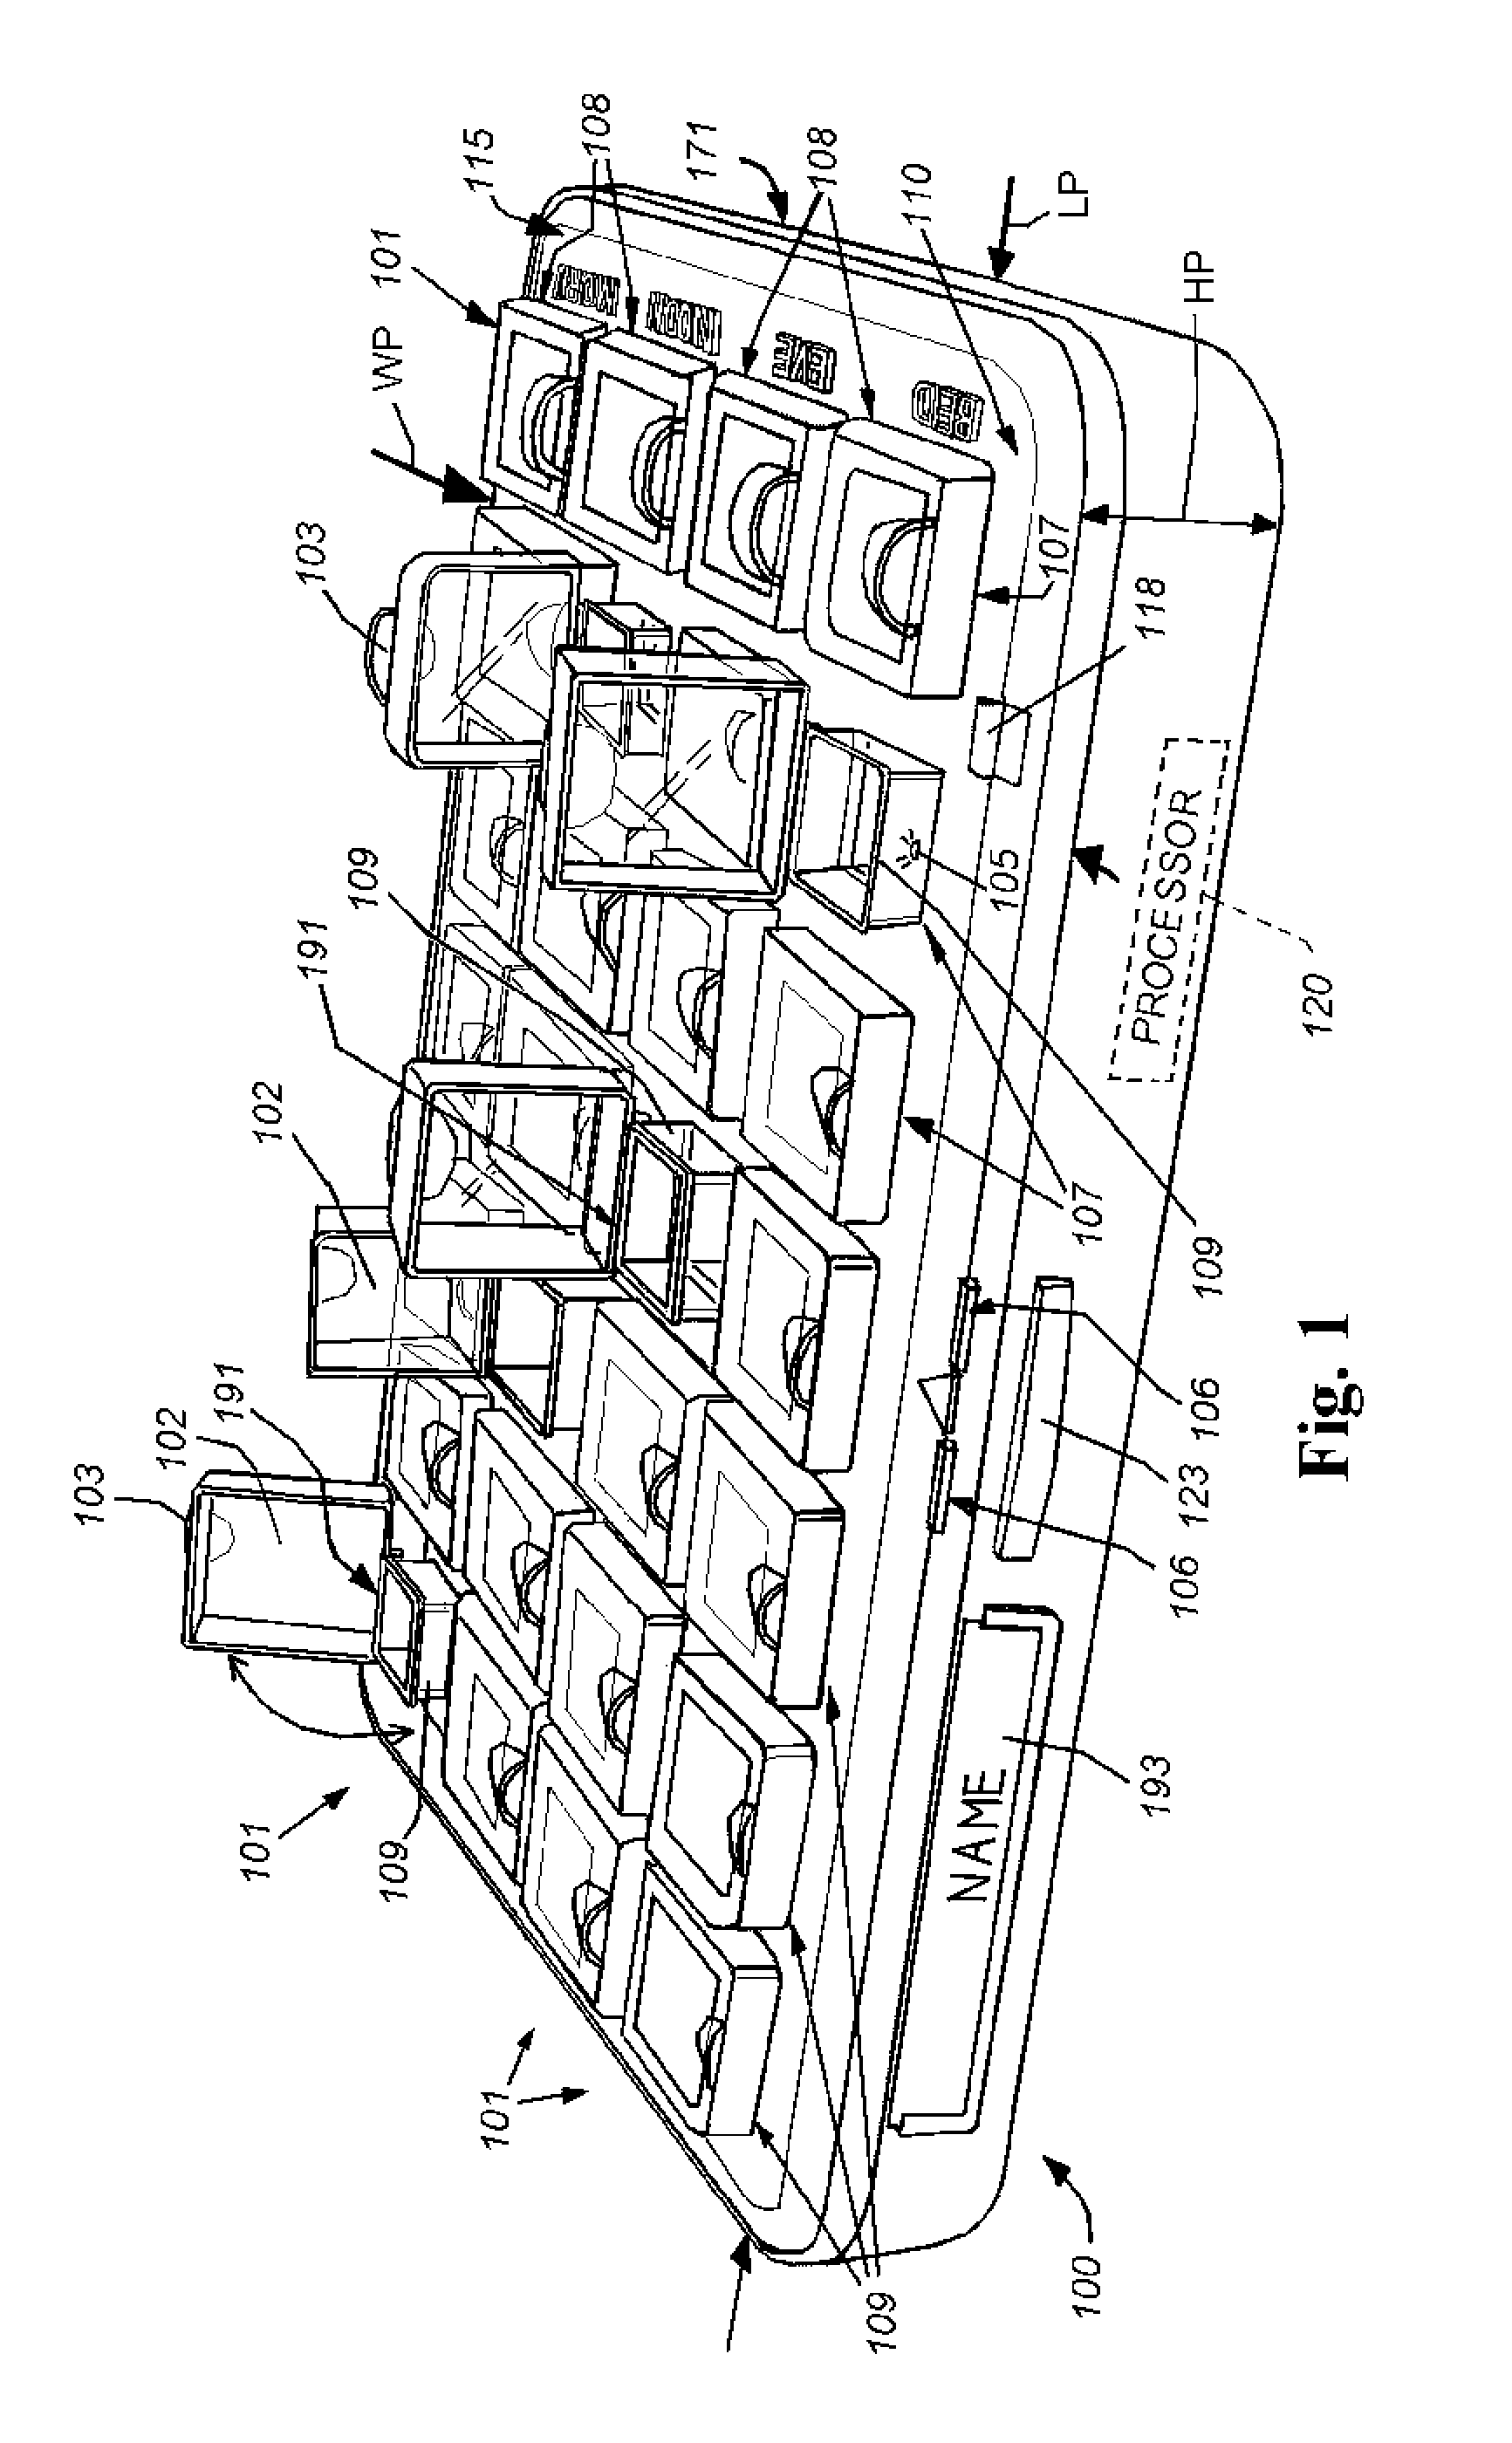 Interactive medication dispensing system with locking compartments